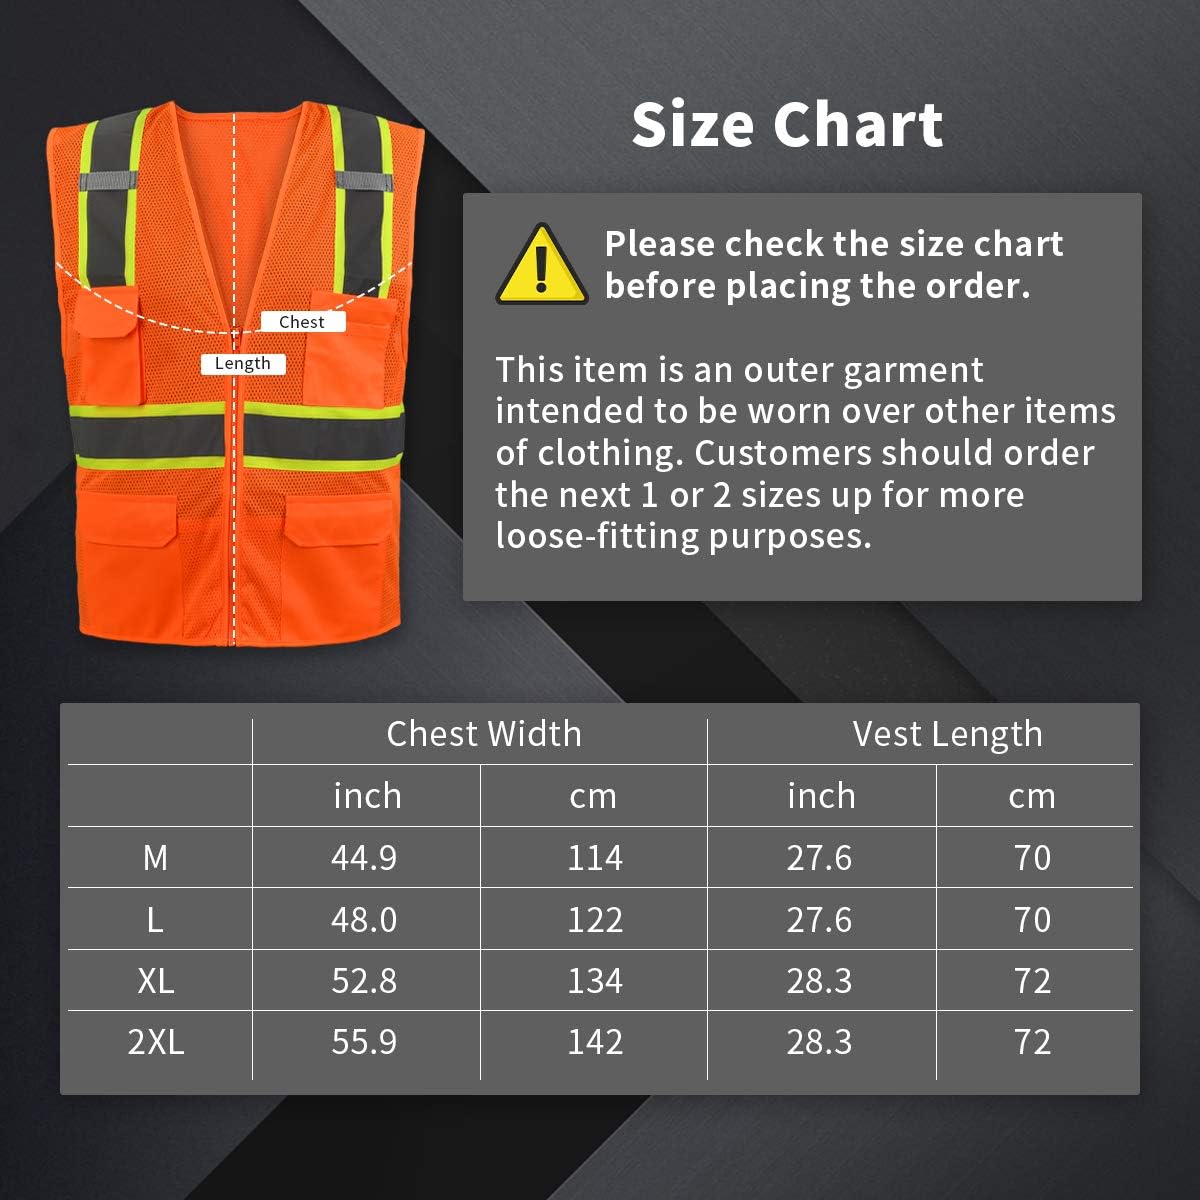 SHORFUNE High Visibility Safety Vest with Pockets, Mic Tabs, Zipper and Reflective Strips, Meets ANSI/ISEA Standards, Orange, L